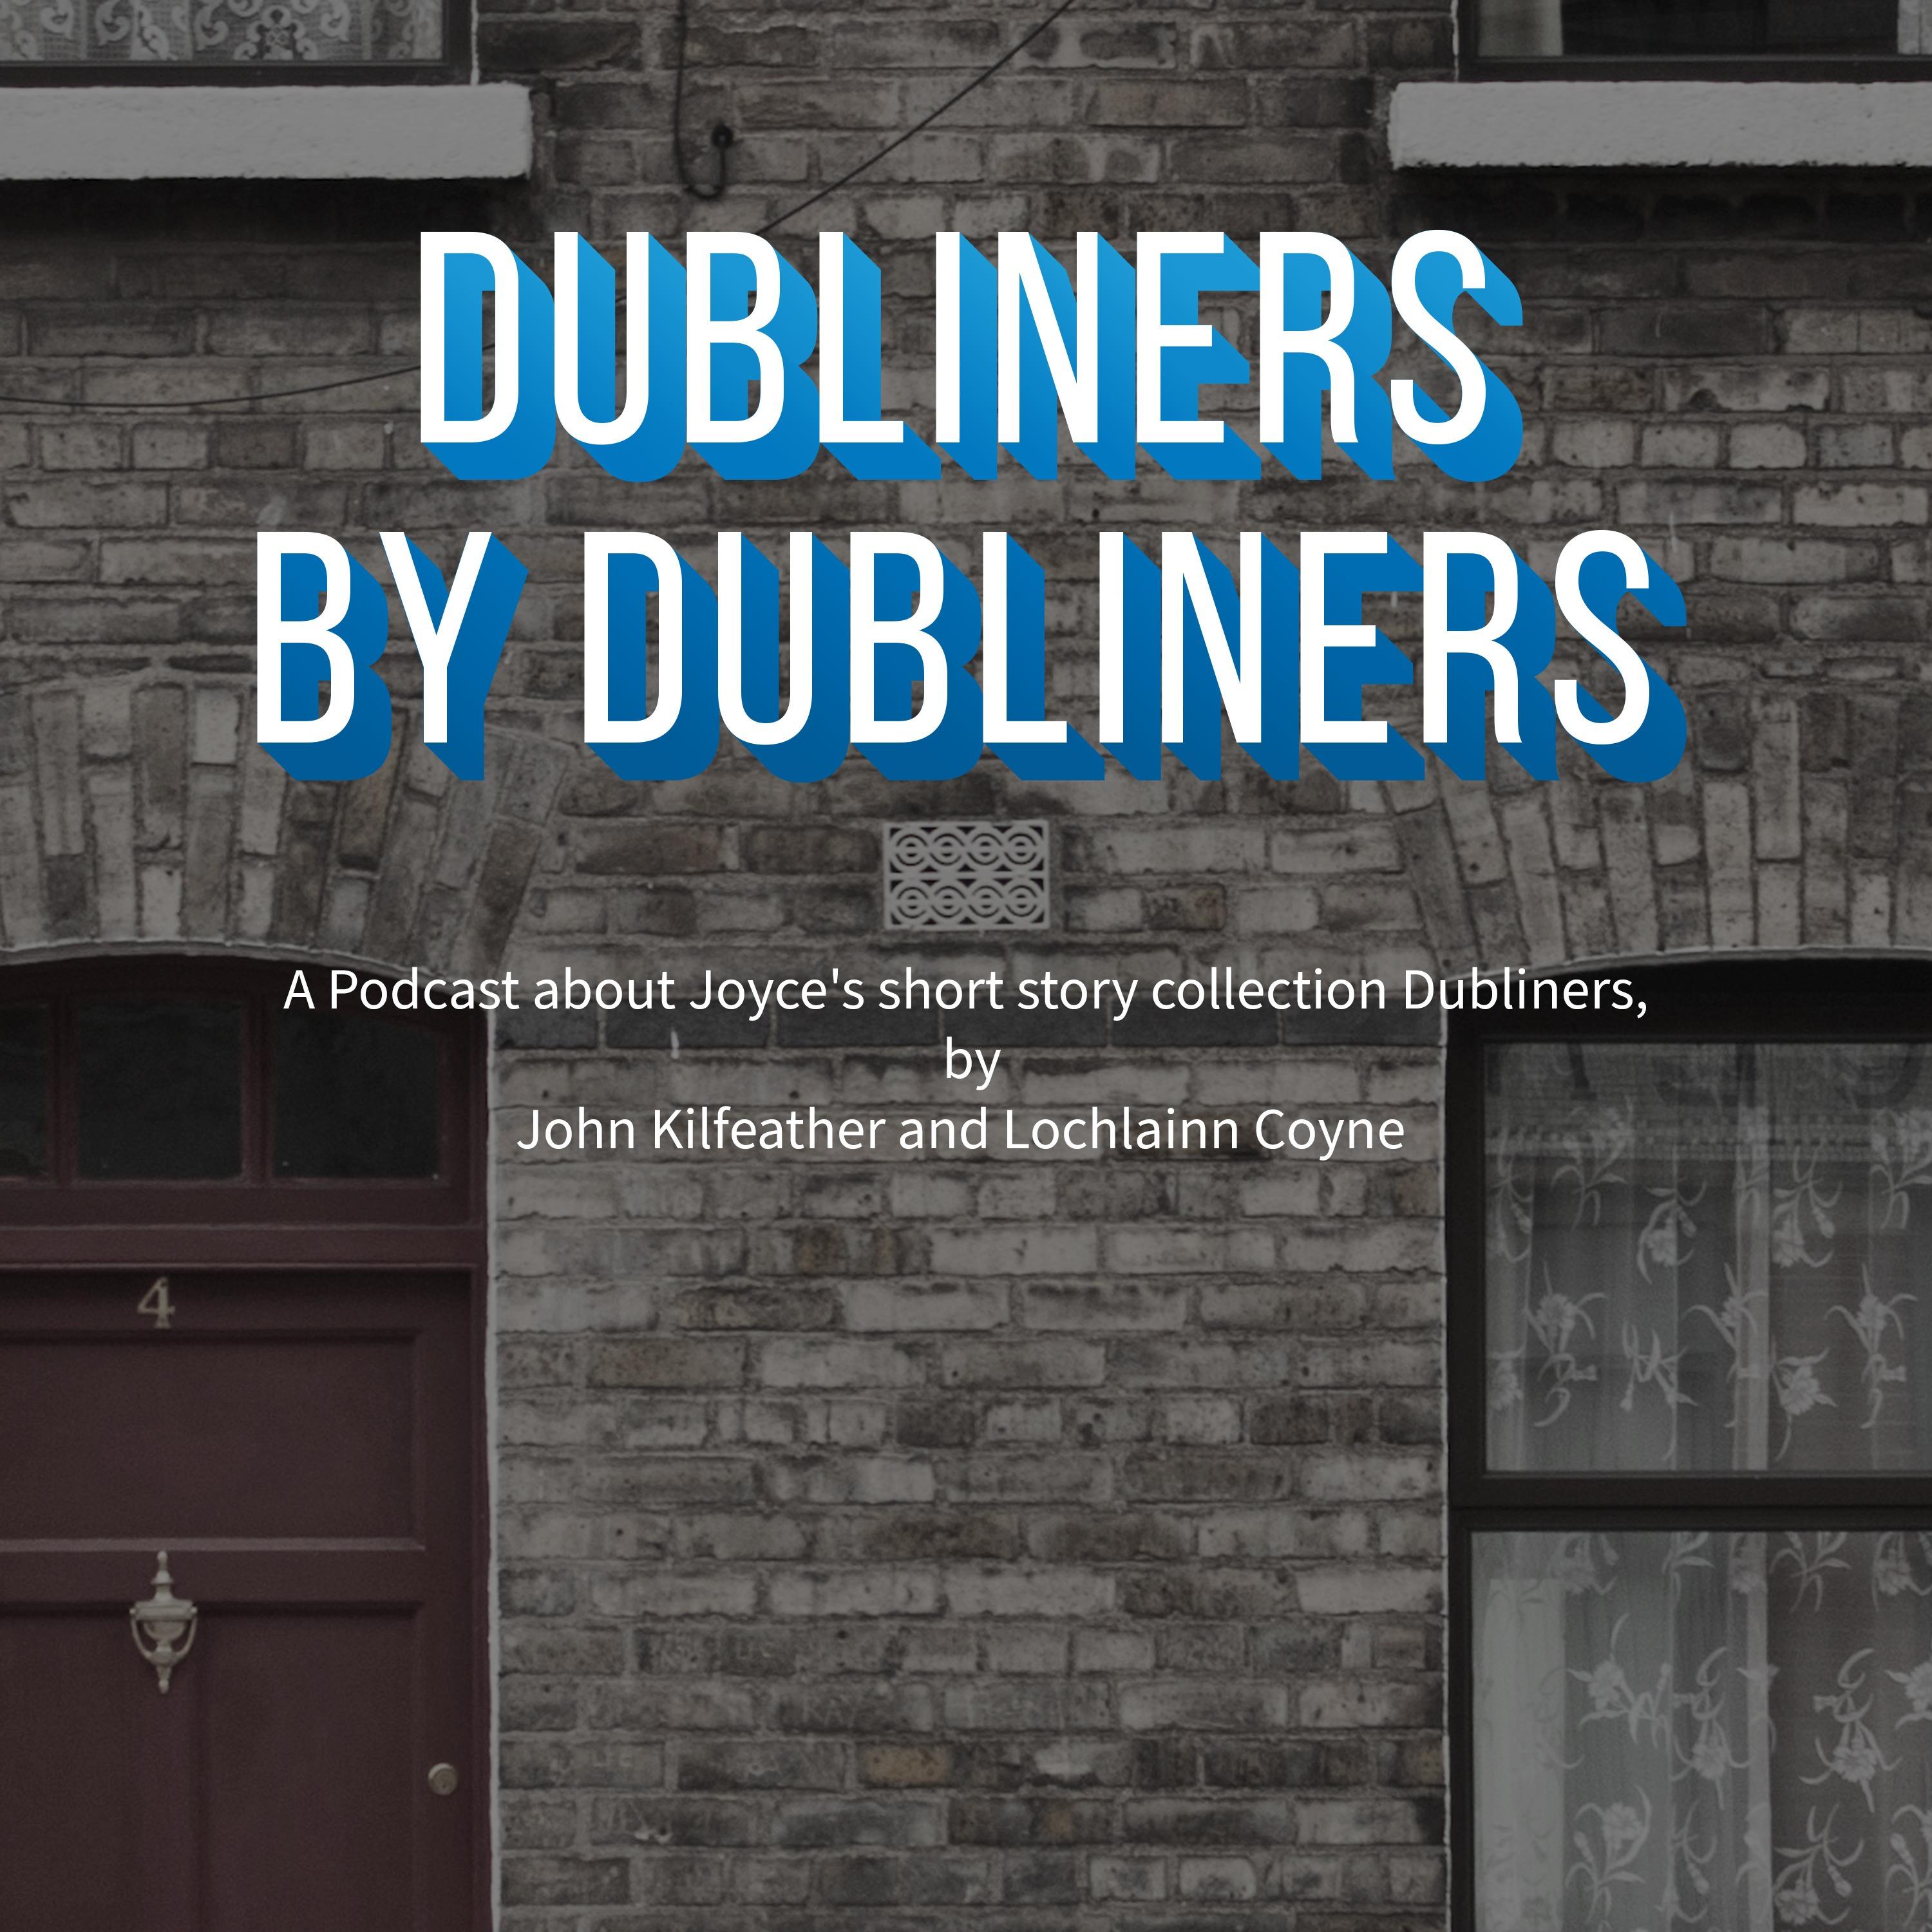 Dubliners by Dubliners